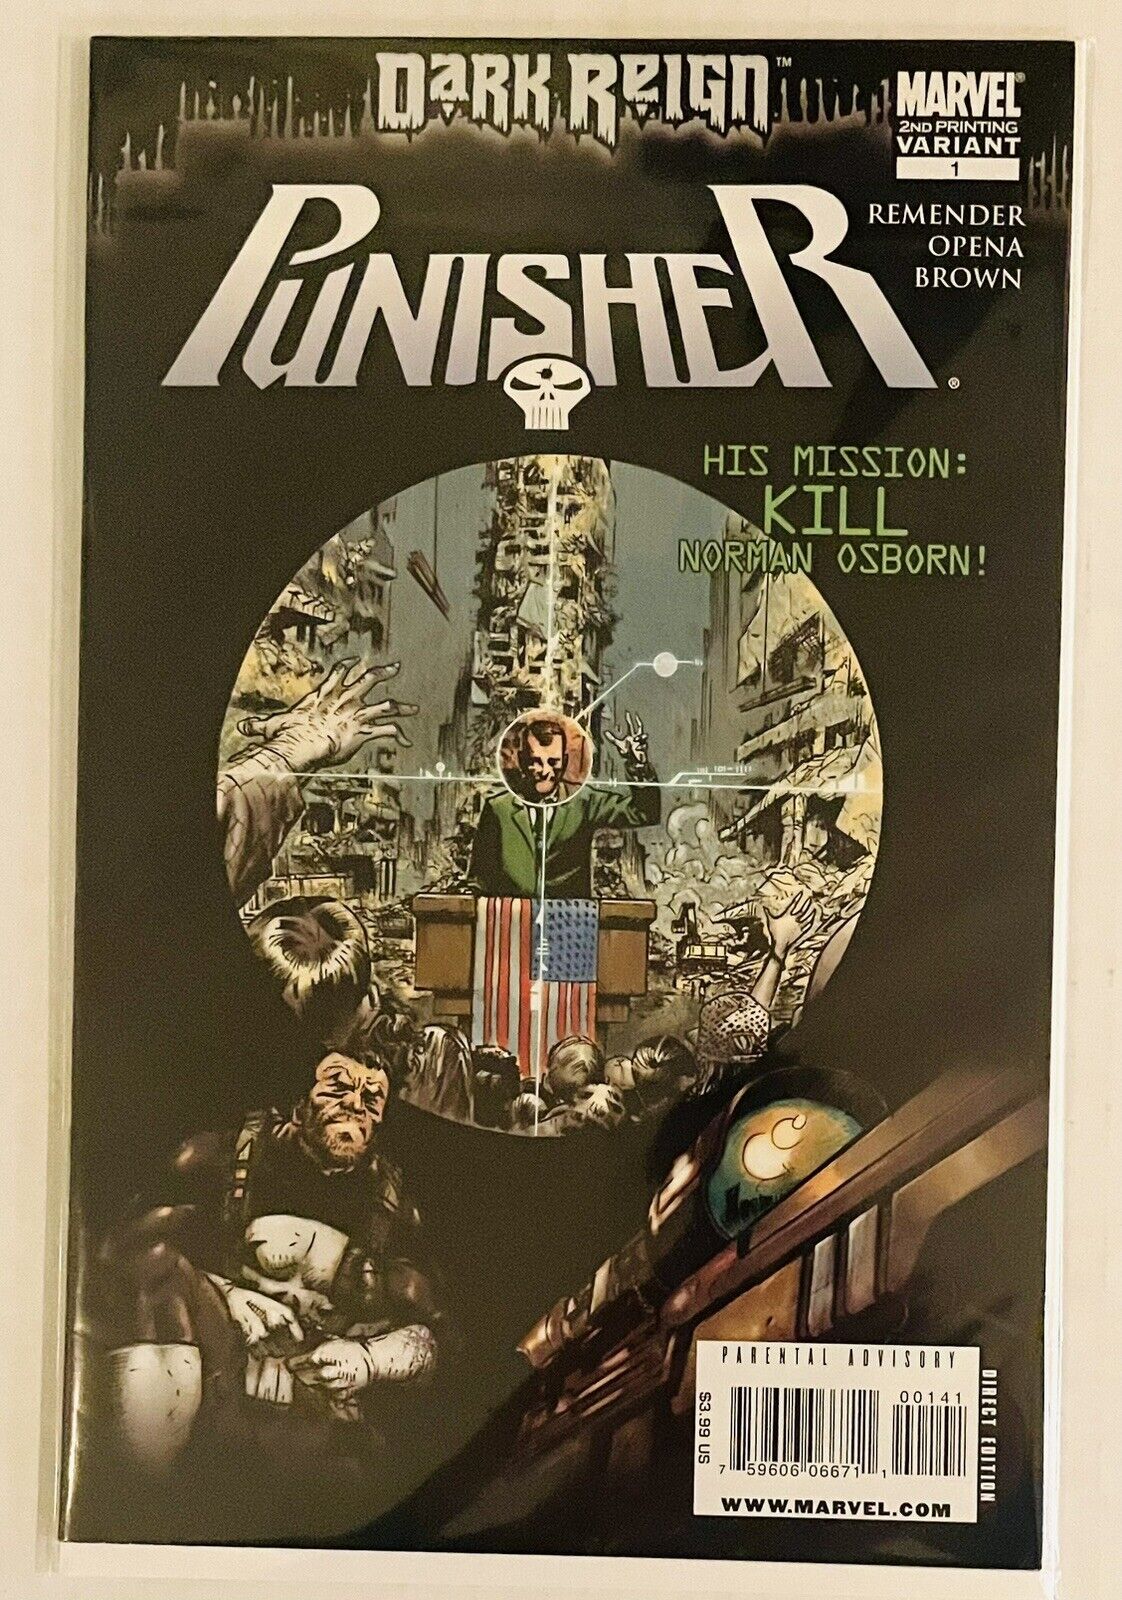 Punisher #1  💥VARIANT💥  2nd Print Variant By Jerome Opena   2009